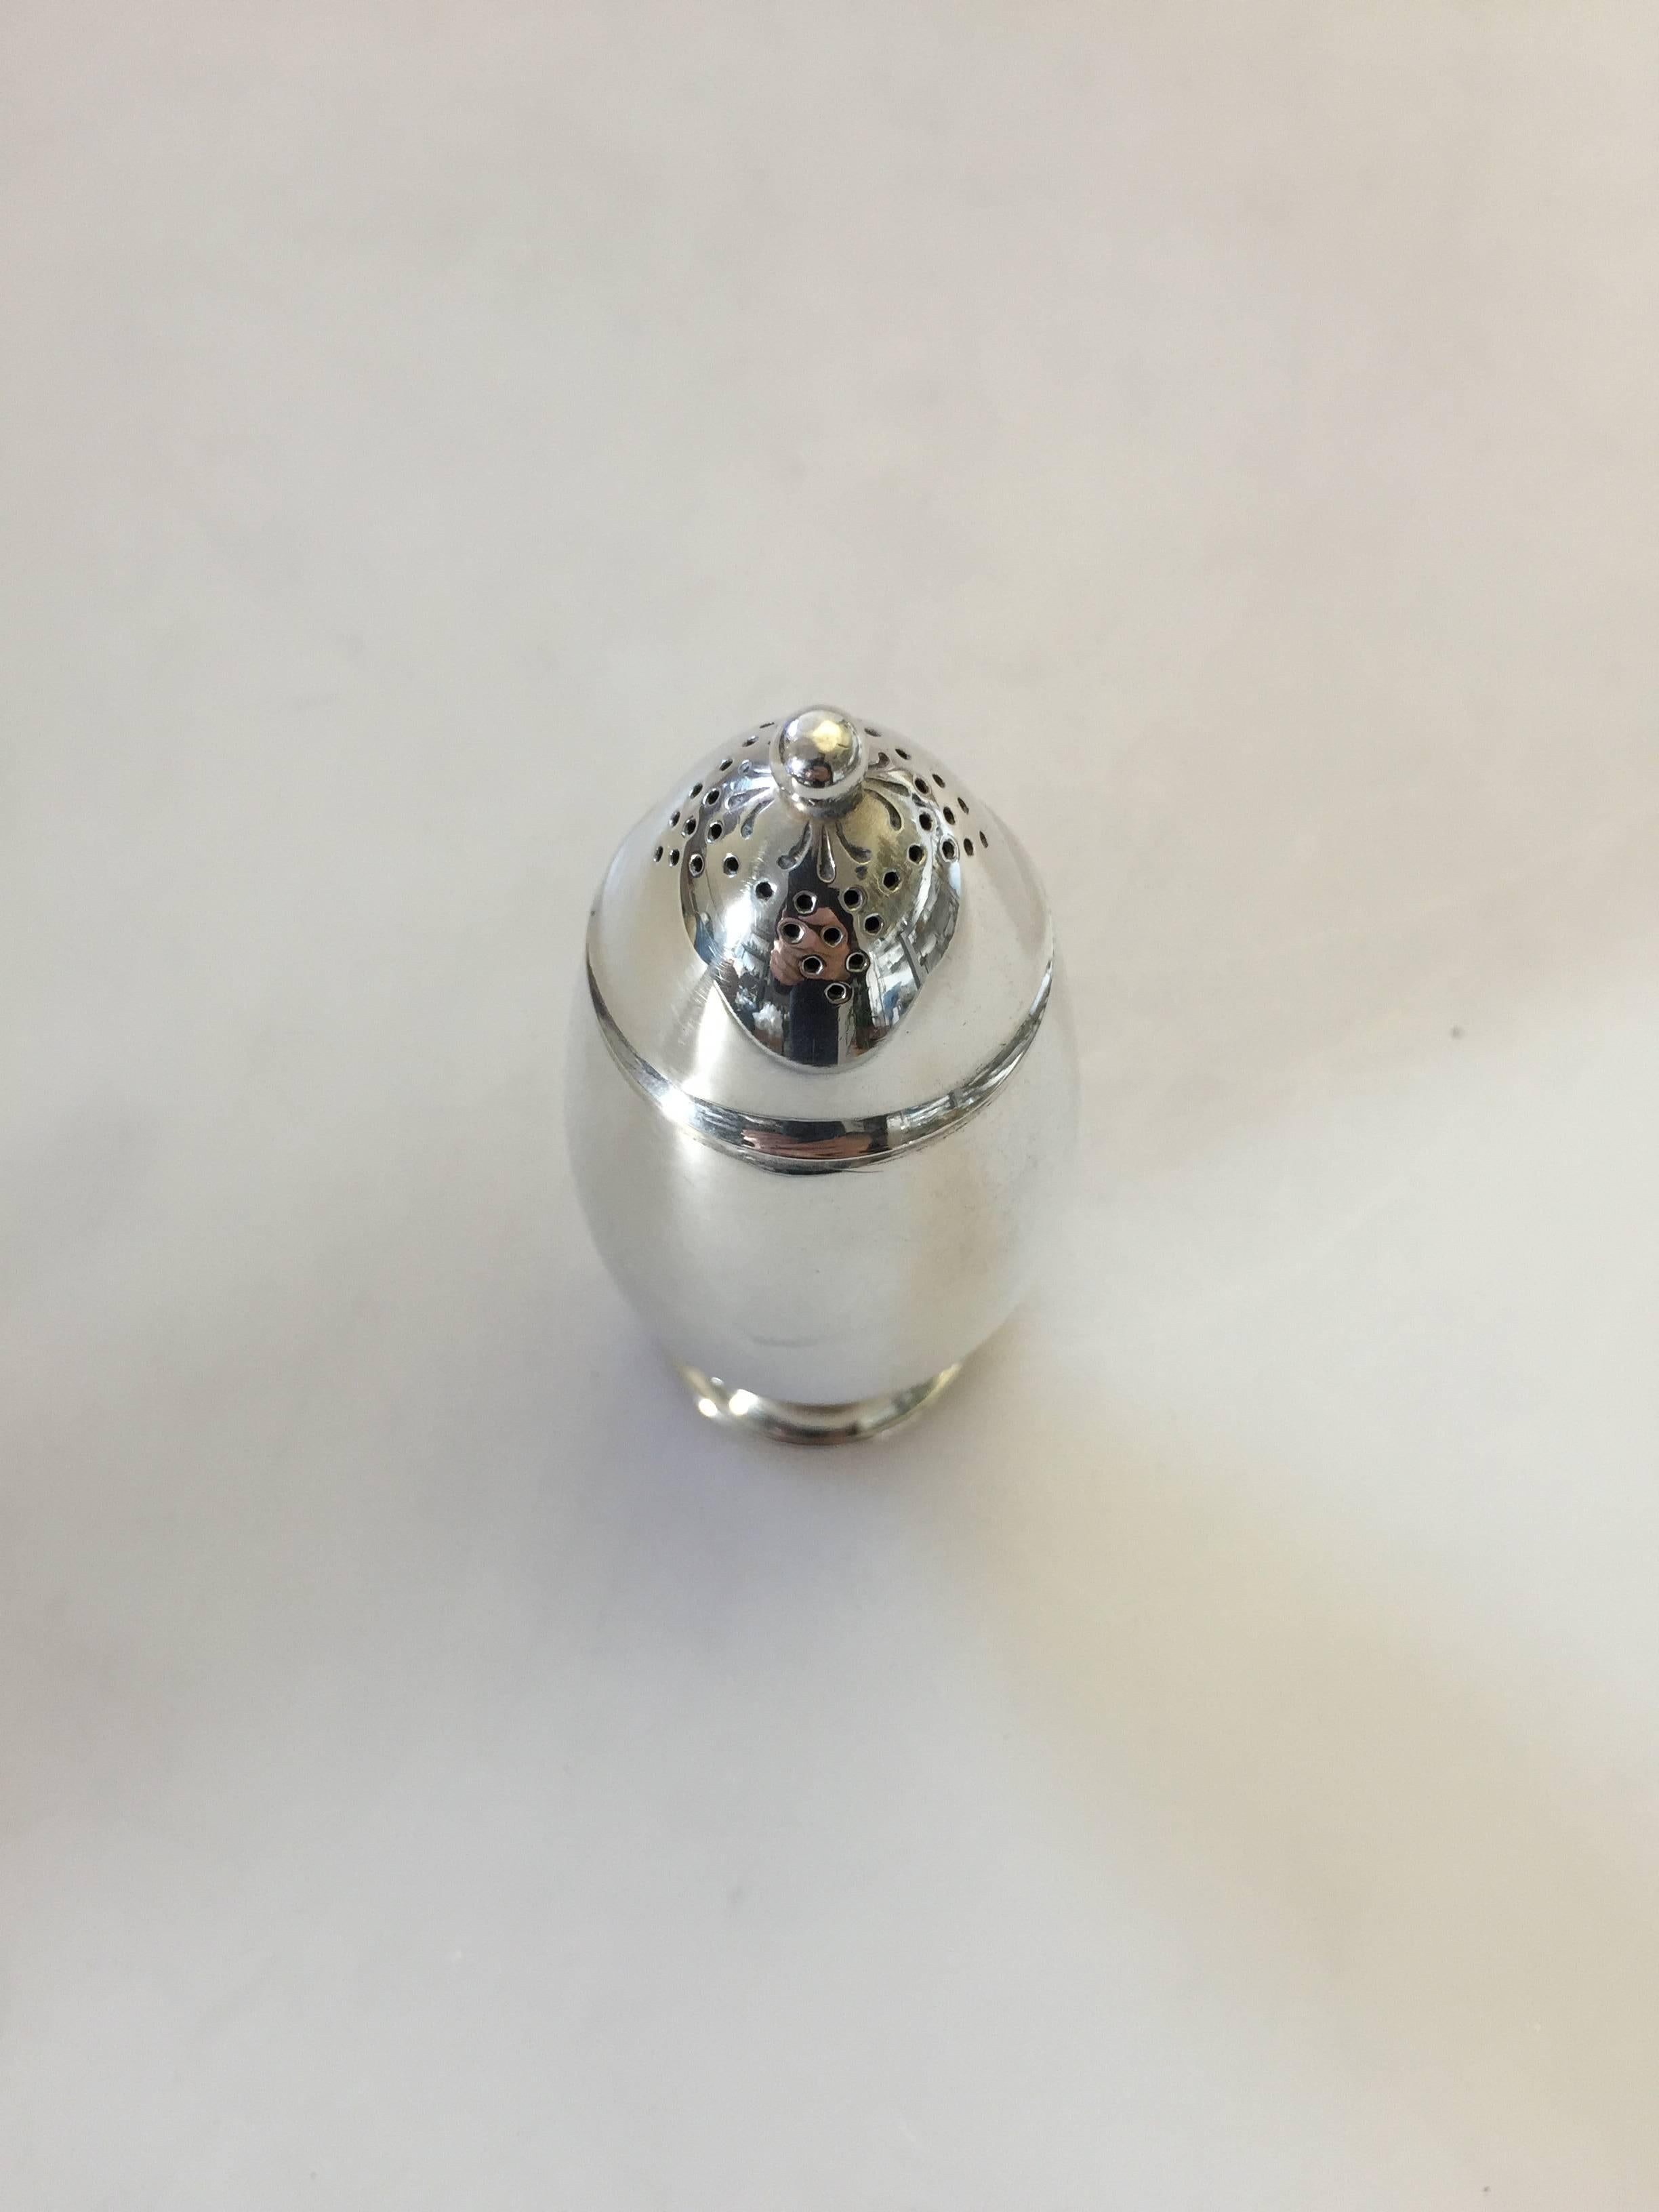 Georg Jensen sterling silver cactus salt shaker. Measures 5 cm high and is in perfect condition.

Georg Jensen (1866-1935) opened his small silver atelier in Copenhagen, Denmark in 1904. By 1935 the year of his death, he had received world acclaim